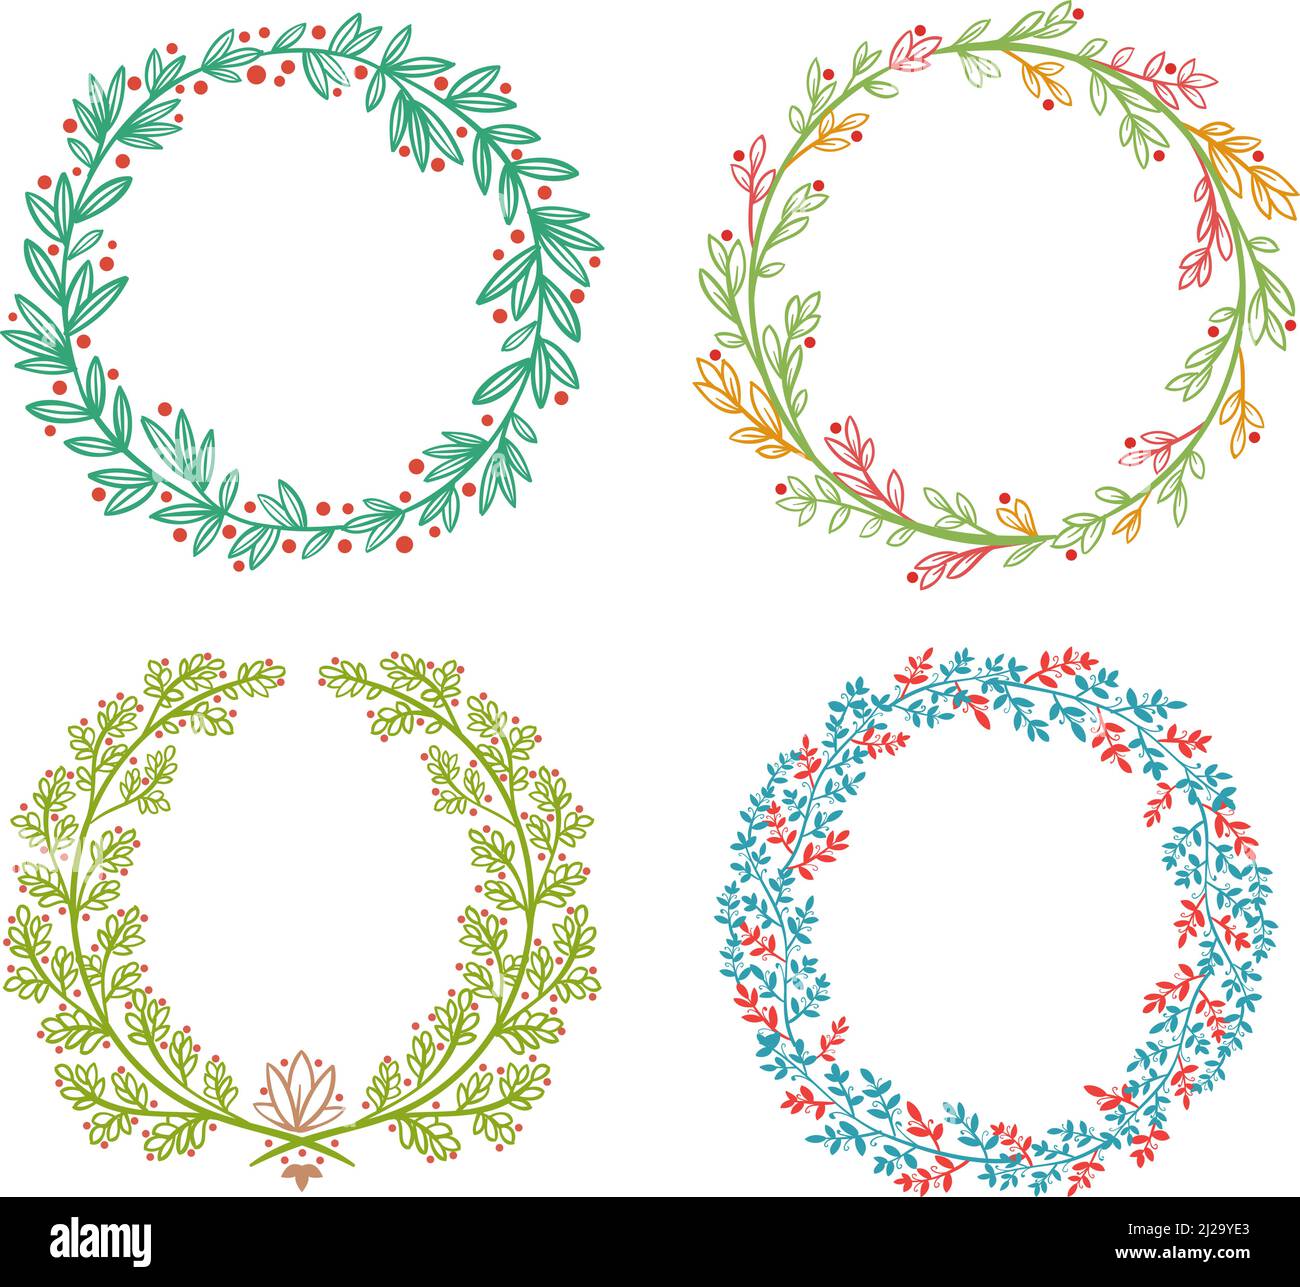 Floral ornament wreaths with flowers, beauty decoration elements Stock Vector